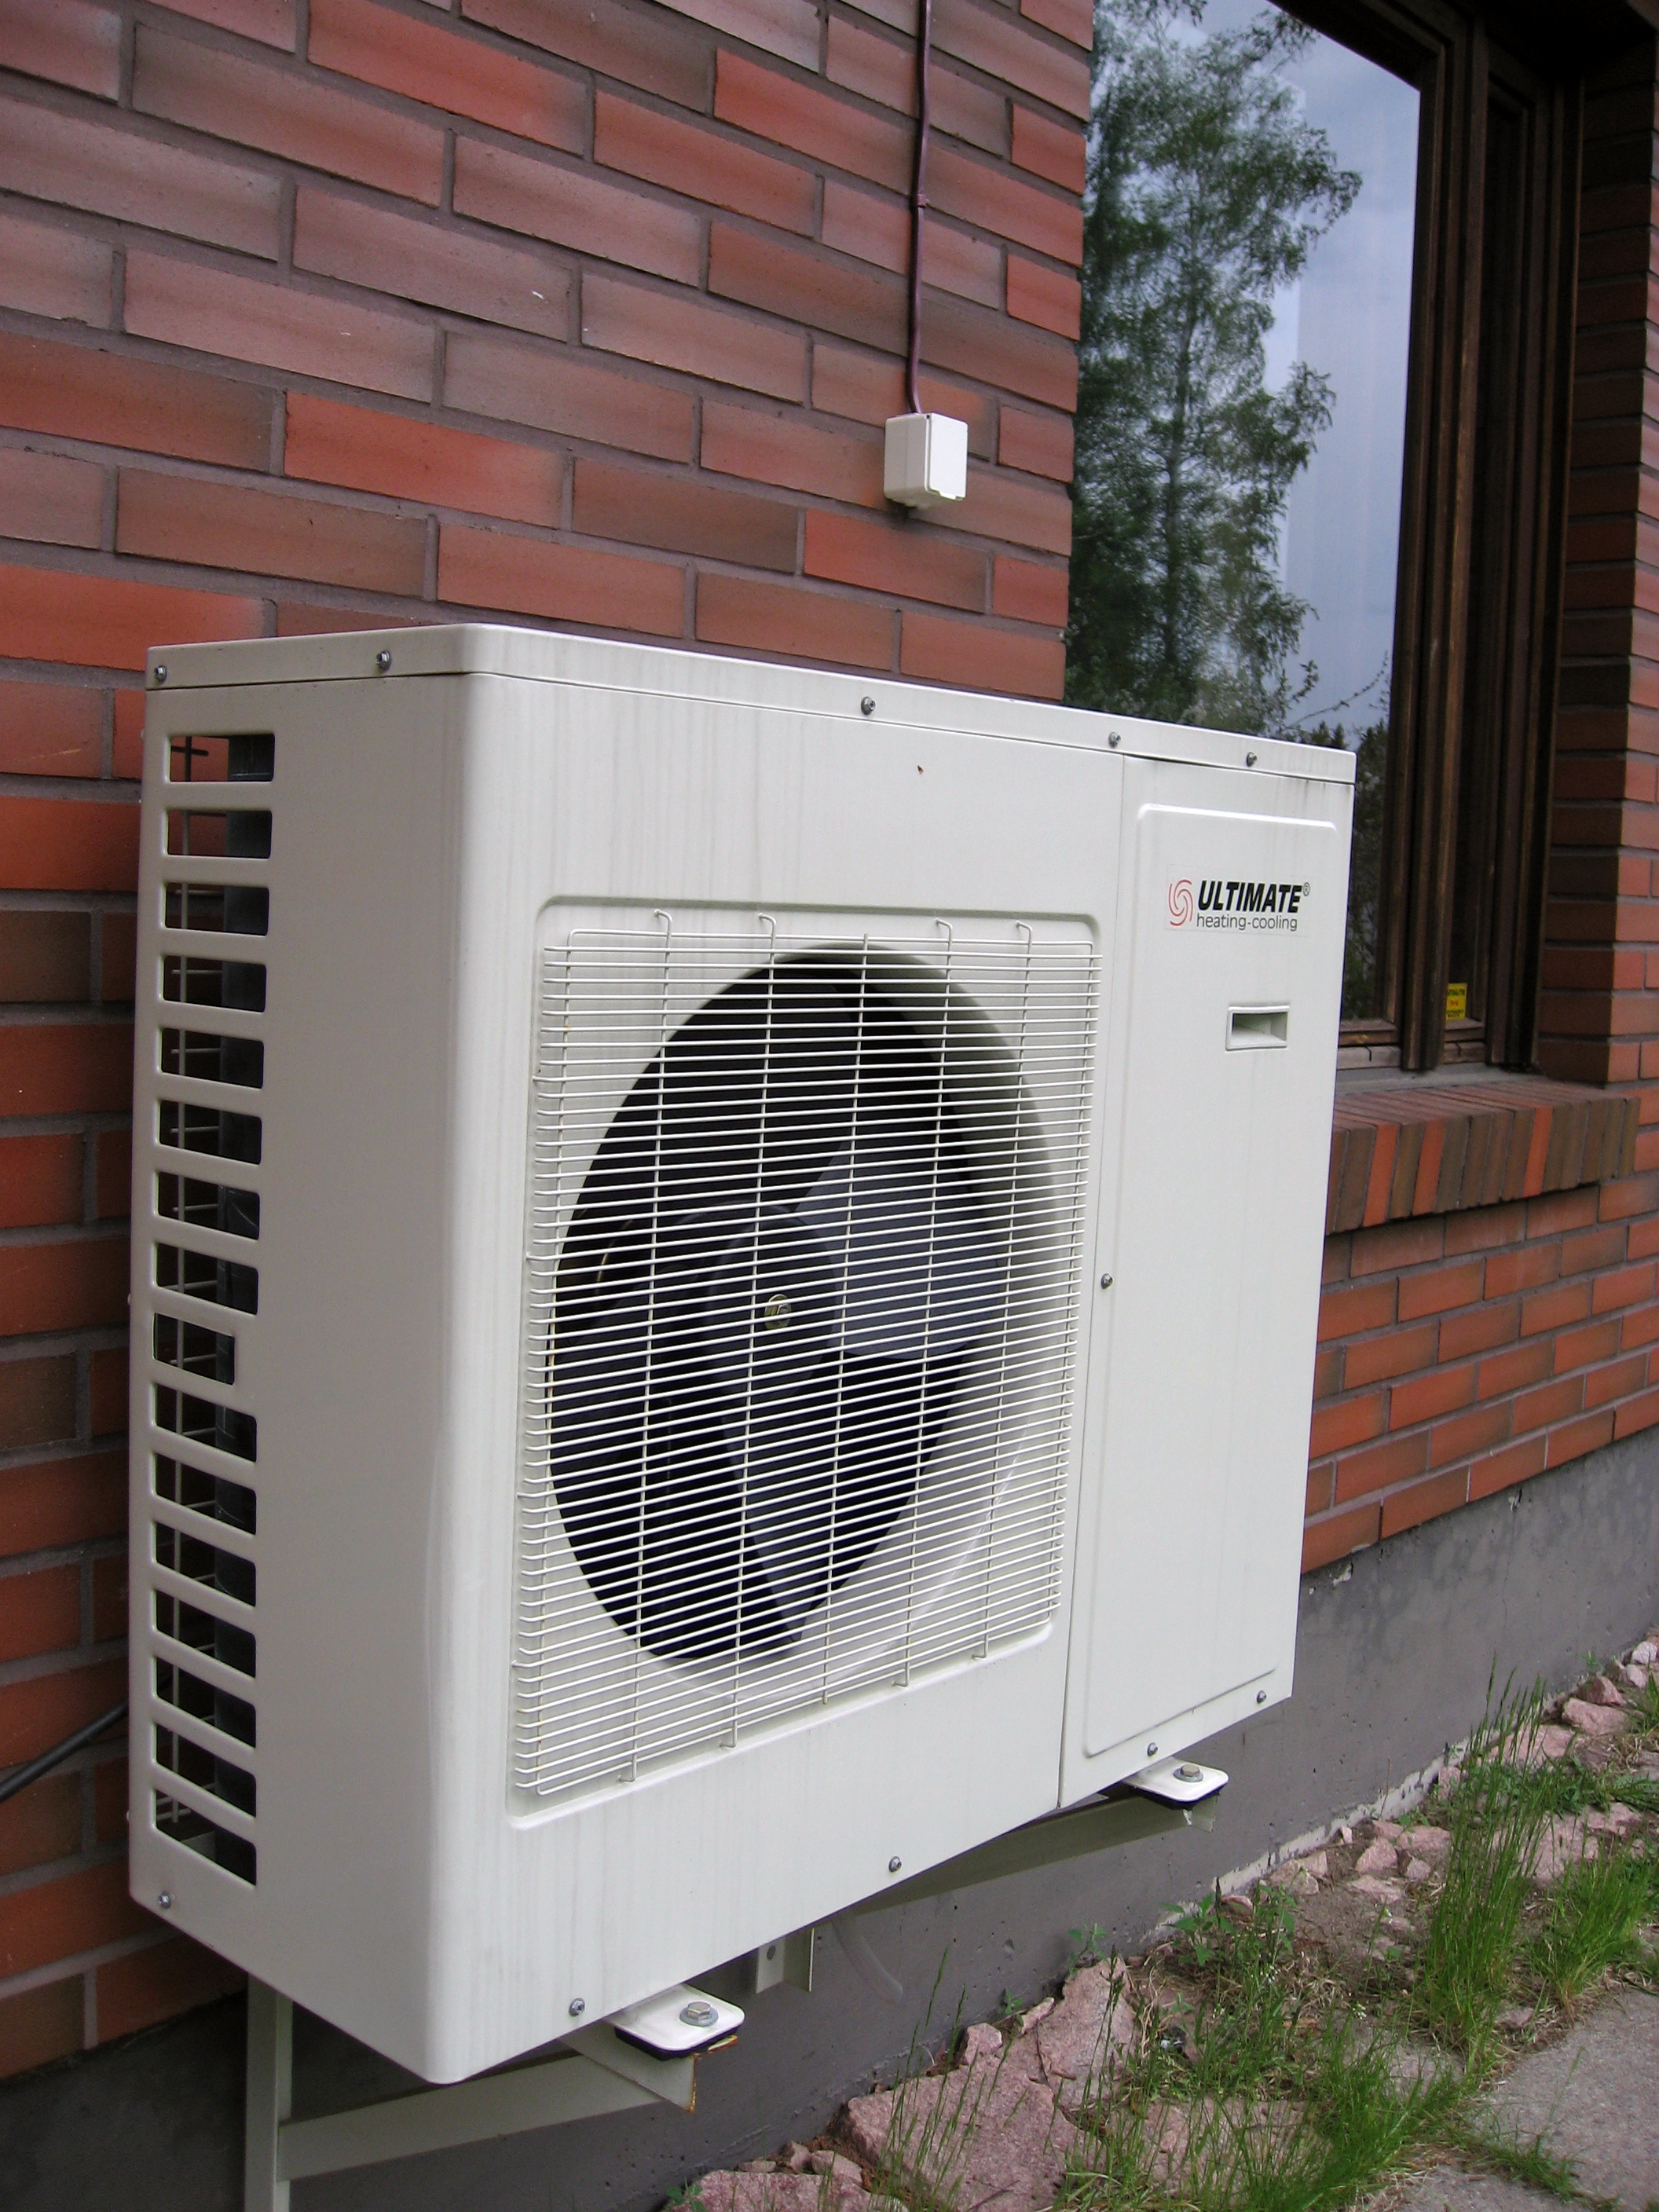 Heat pump on outside wall of house